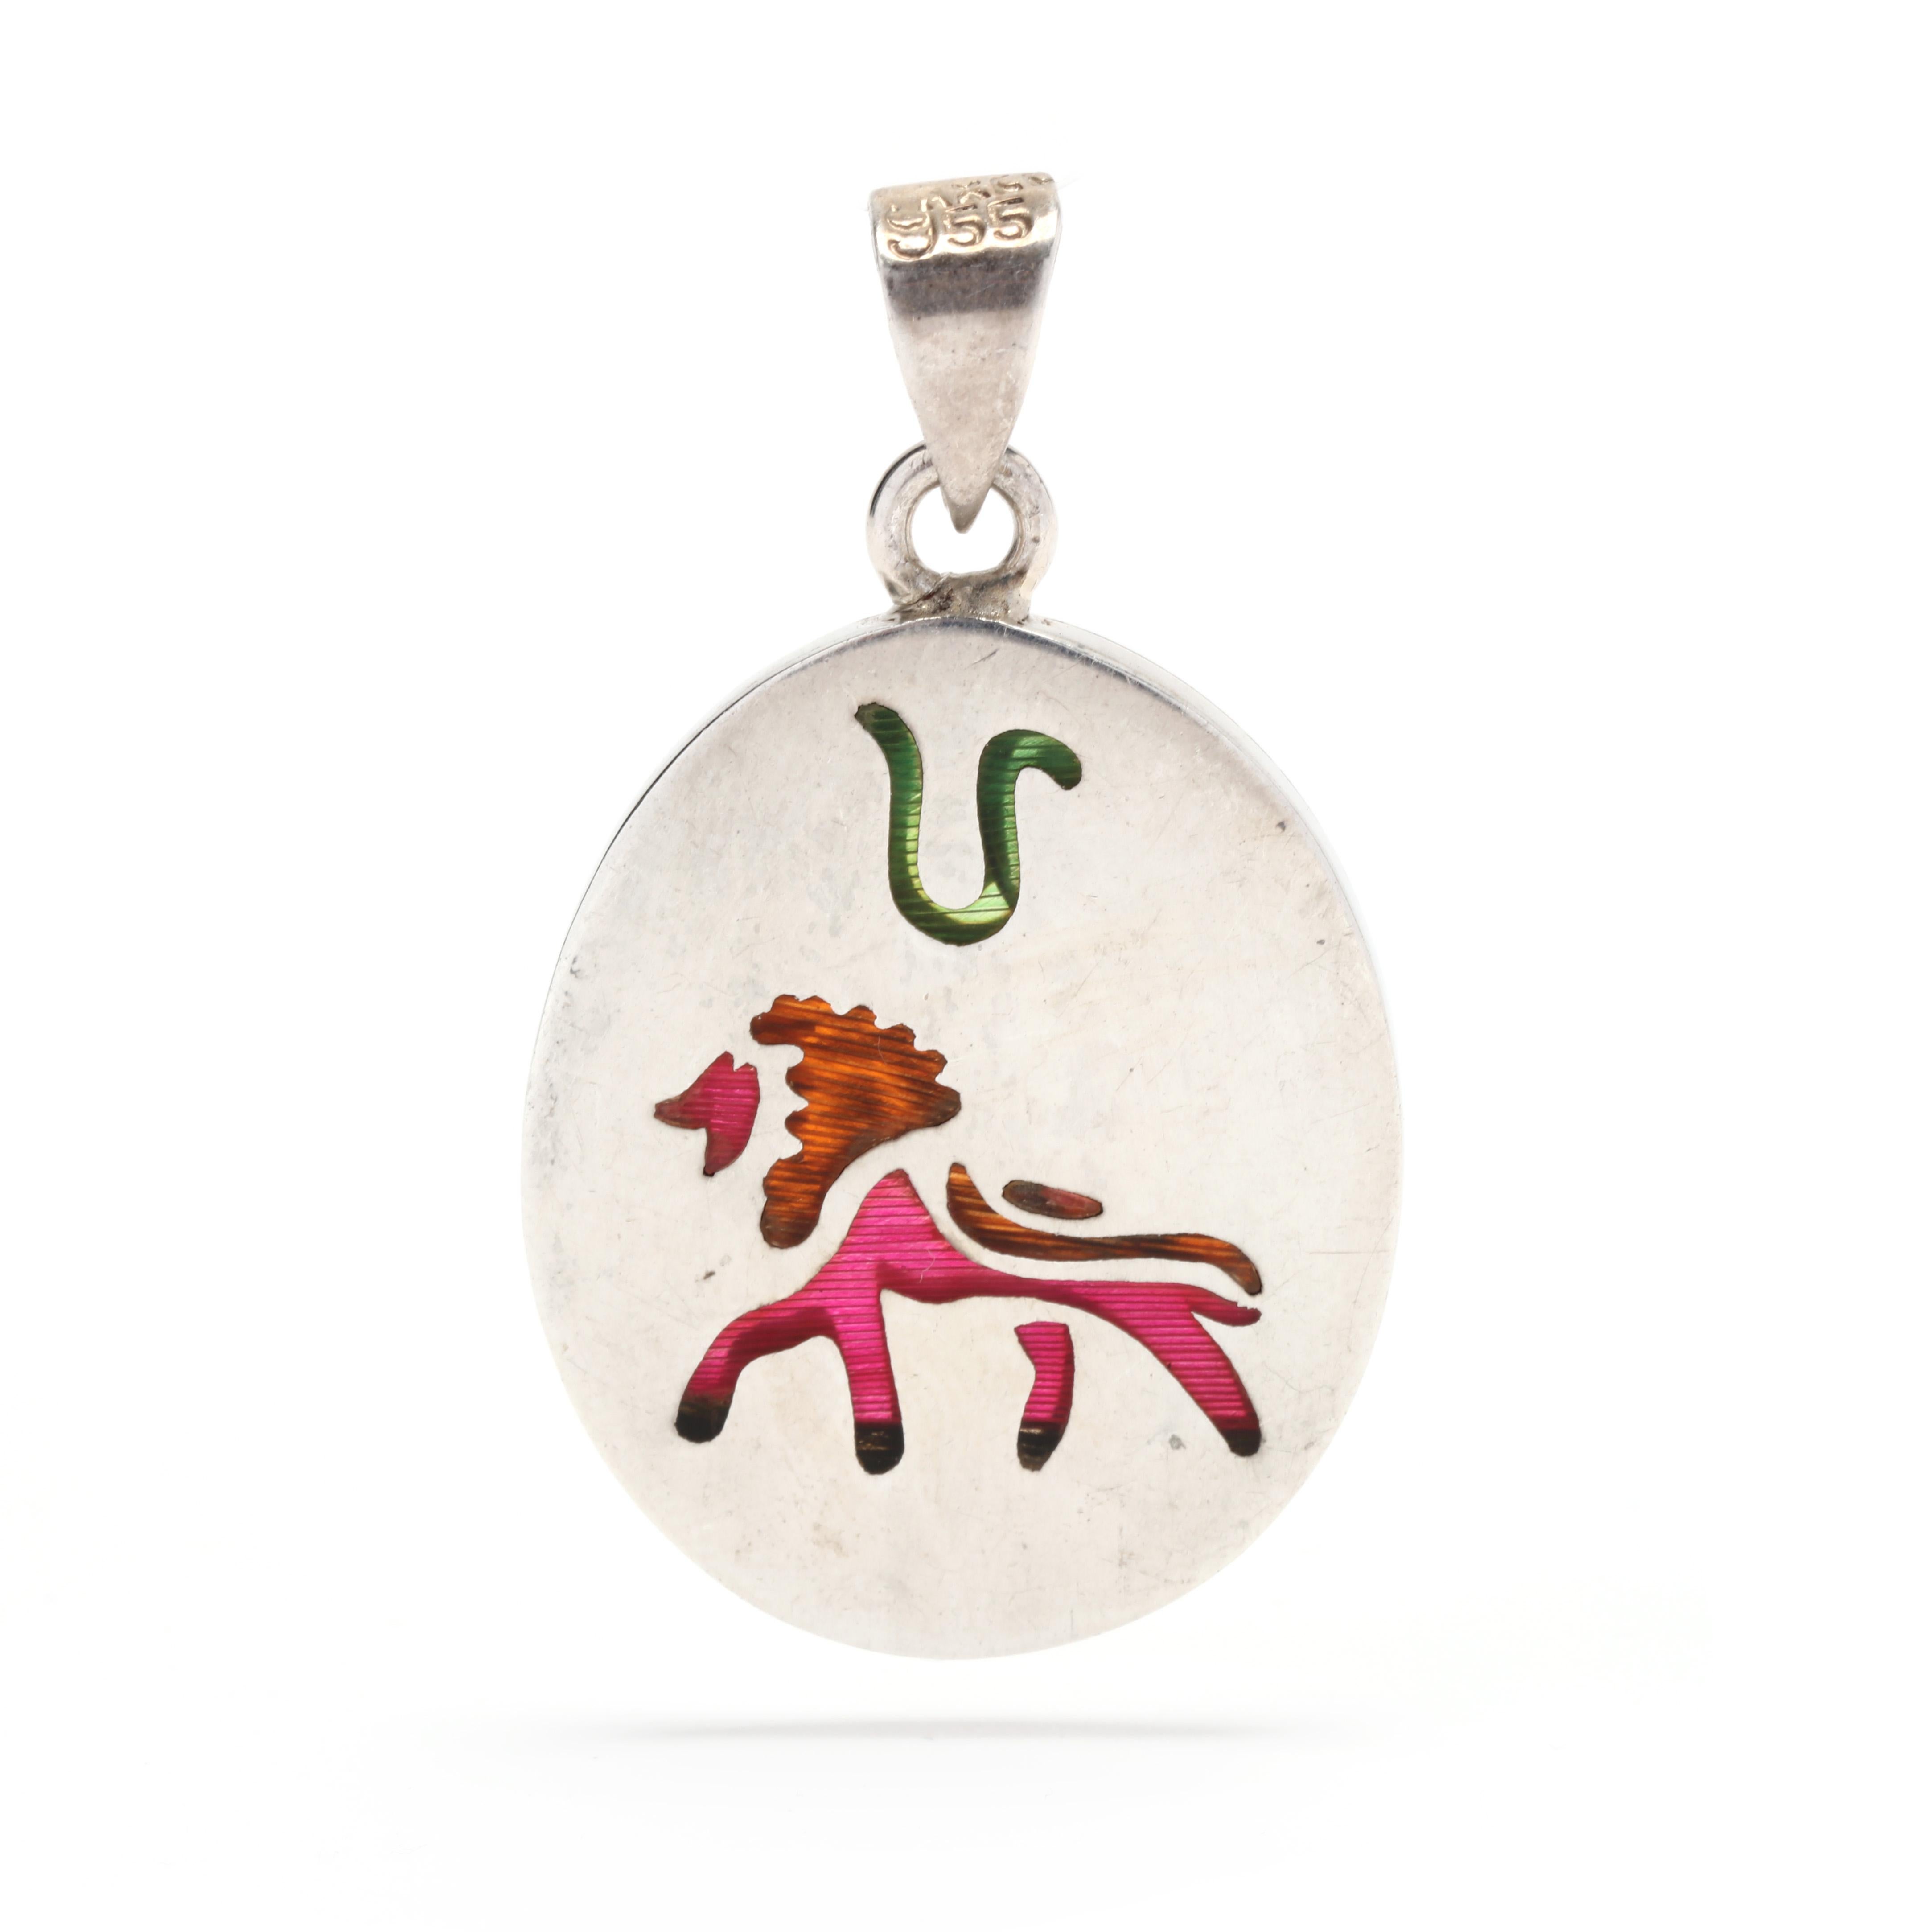 This Leo pendant is the perfect way to show your Leo pride! Crafted from sterling silver, the pendant features a detailed lion design with a star-studded background. The perfect gift for any Leo born in August, this pendant will be a reminder of